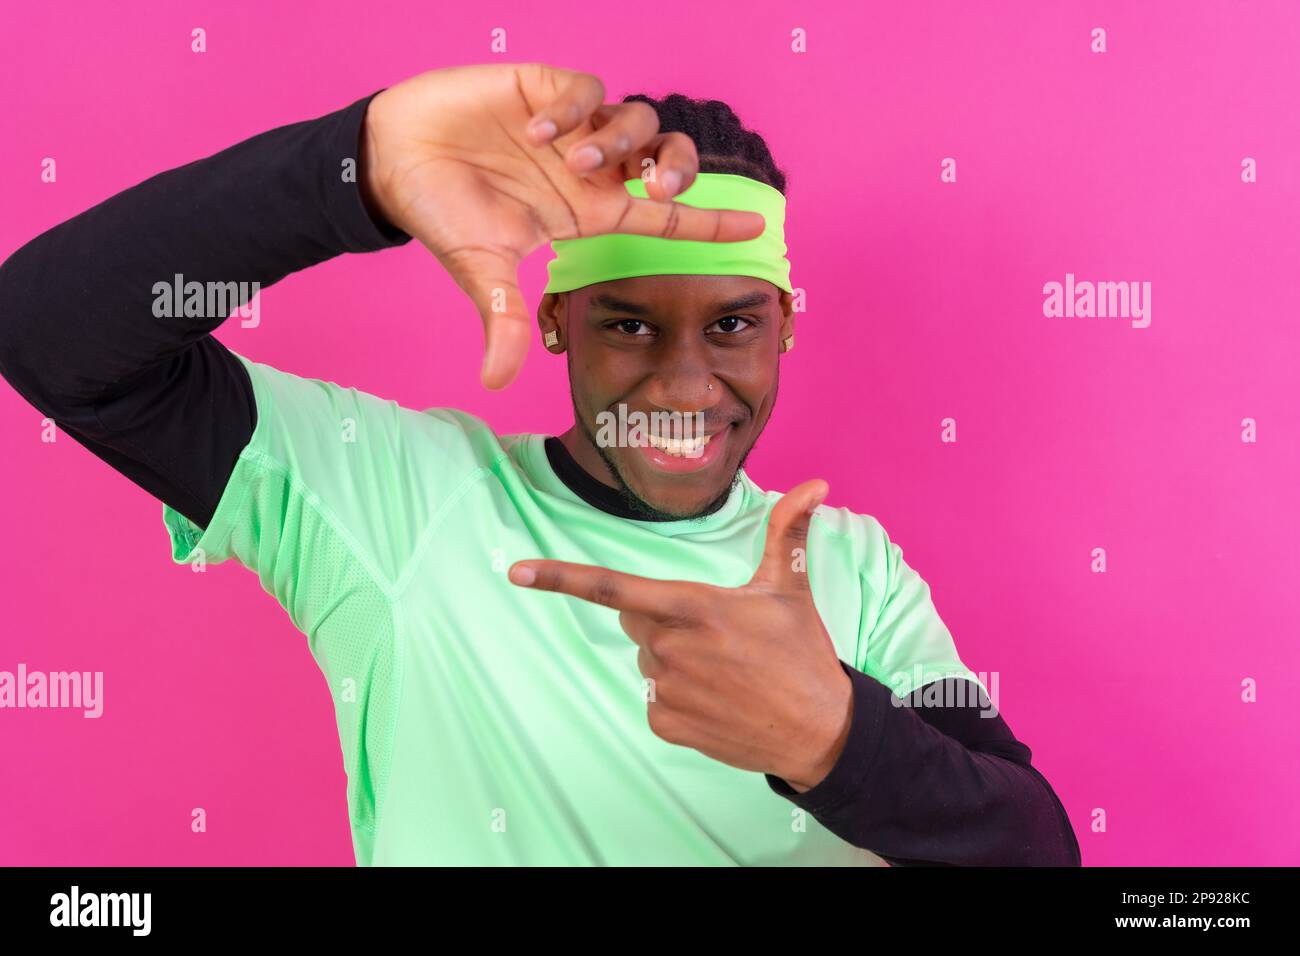 Black ethnic man in green clothes on a pink background, concept portrait, gesture smiling Stock Photo